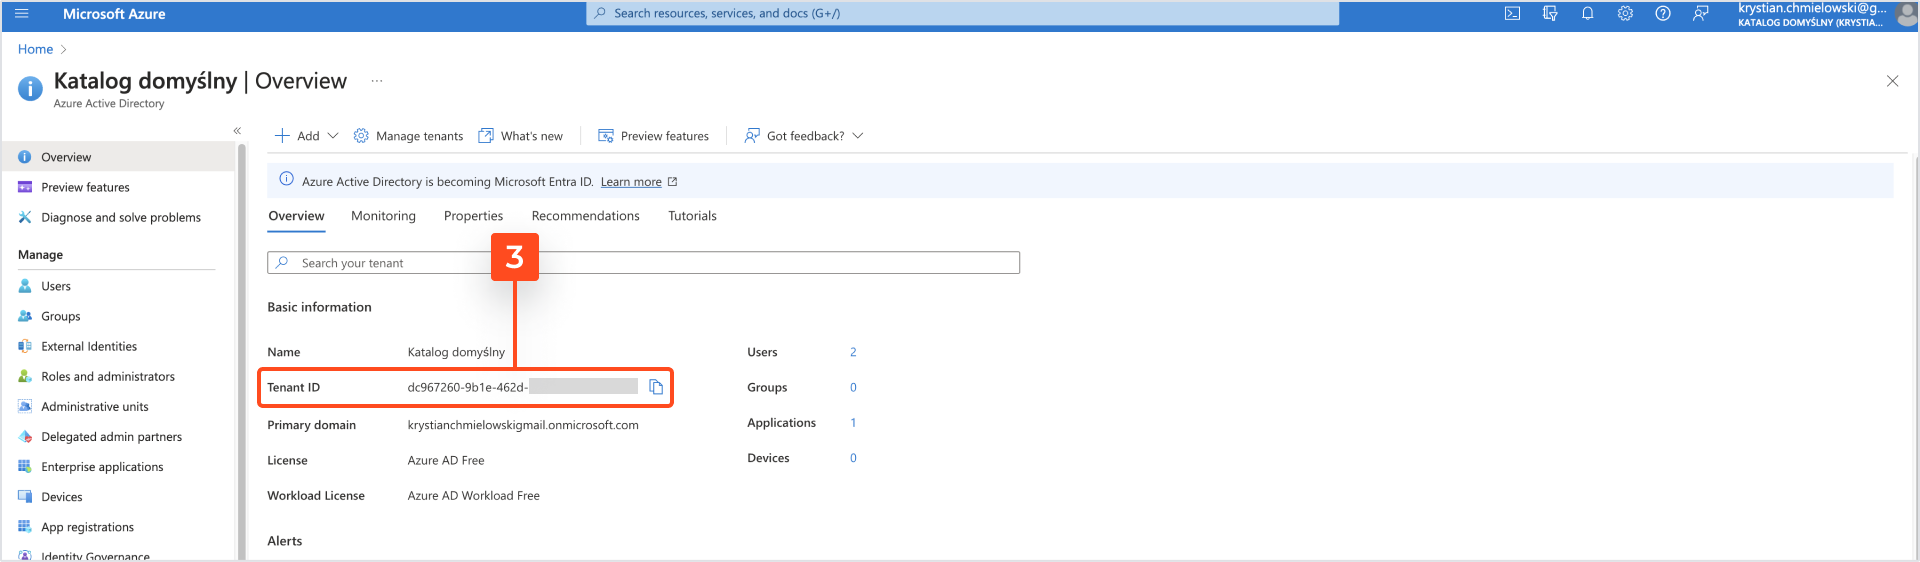 Jira Active Directory integration with Azure AD Attributes - Jira connecting to an LDAP to synchronize user accounts